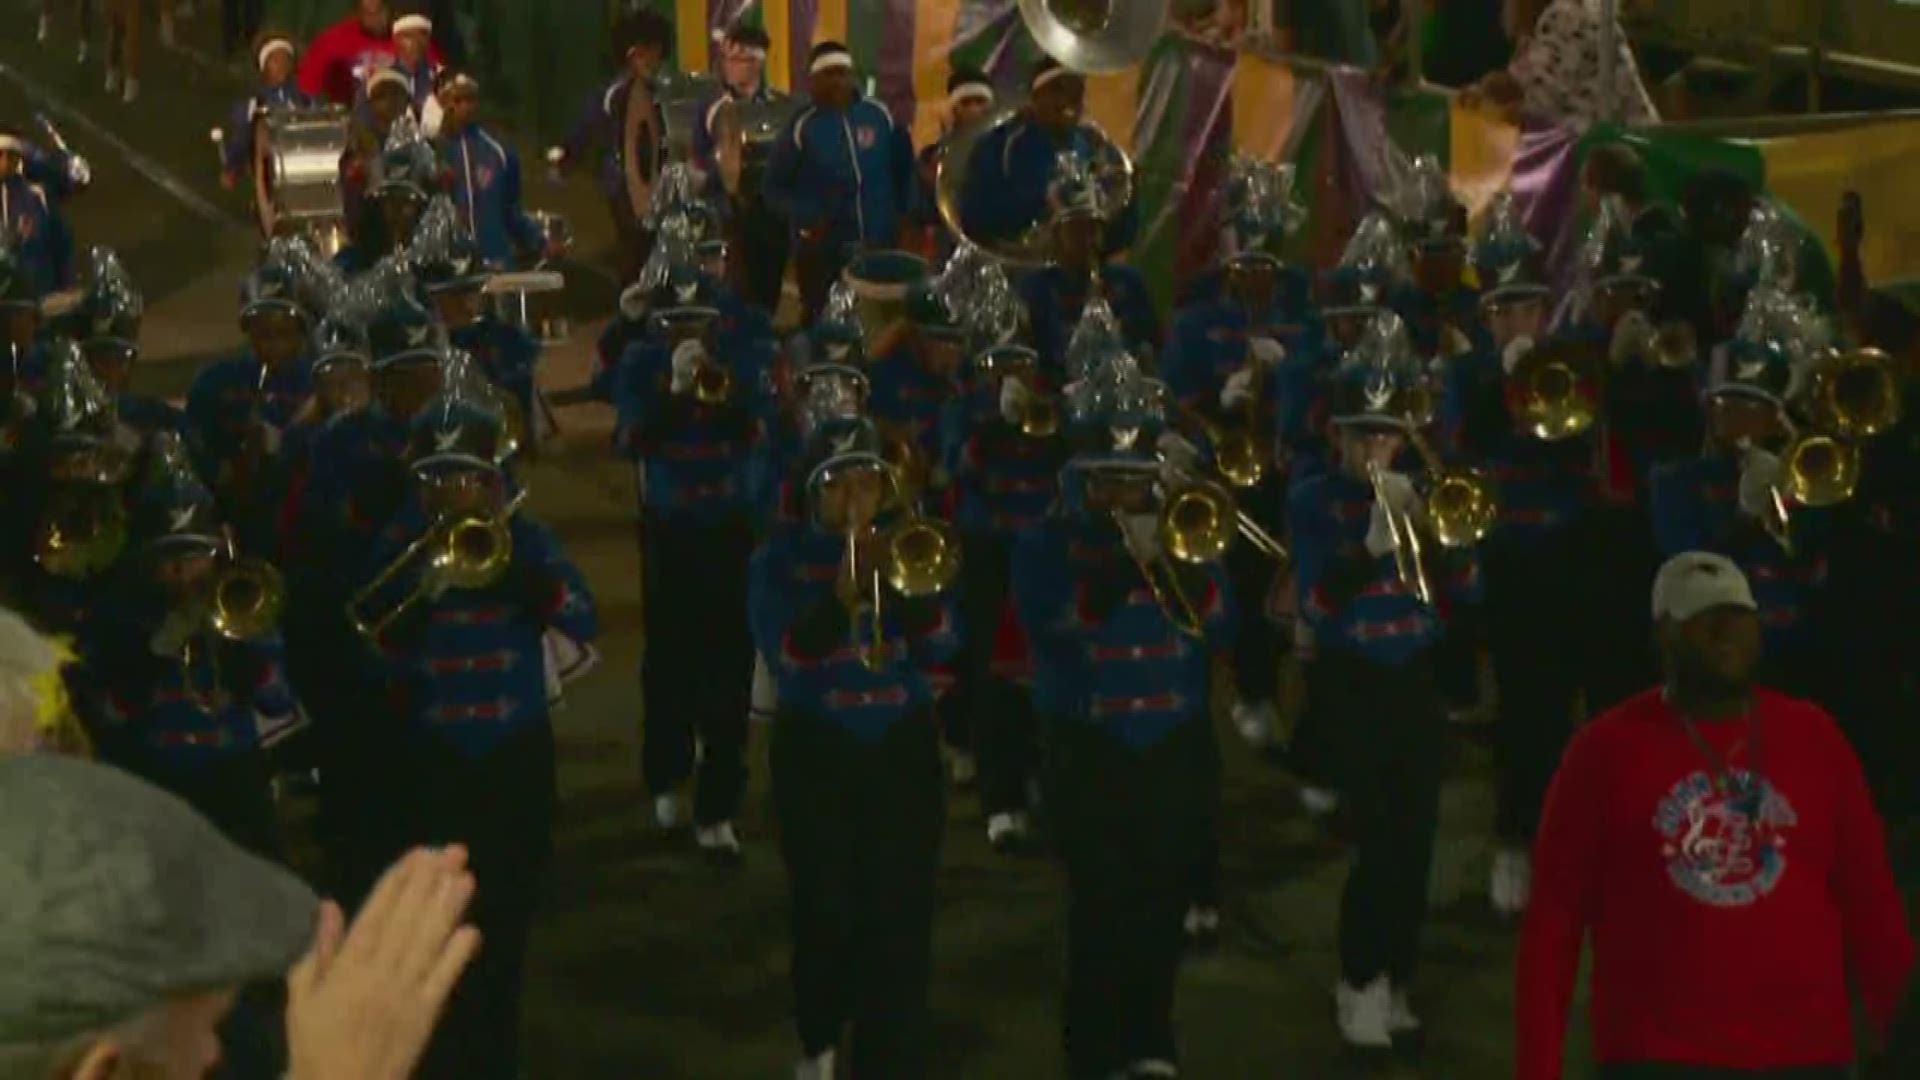 John Ehret High School students danced, played music and marched along St. Charles Avenue Wednesday night.